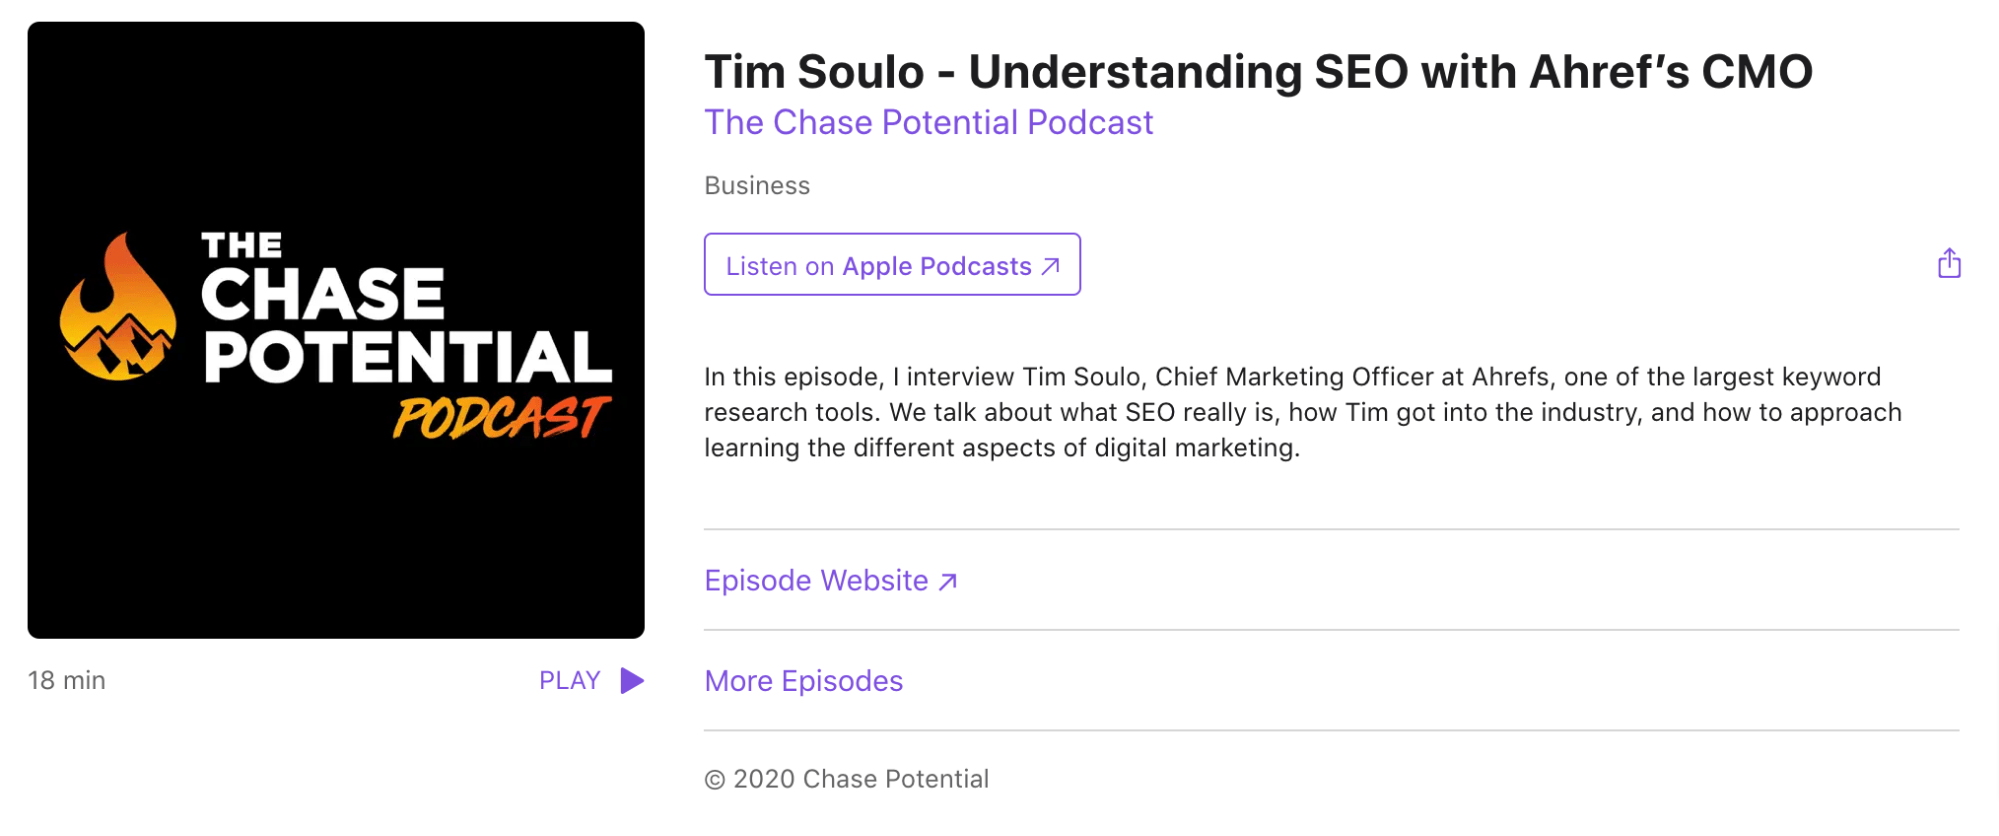 Podcast example that acts as product promotion